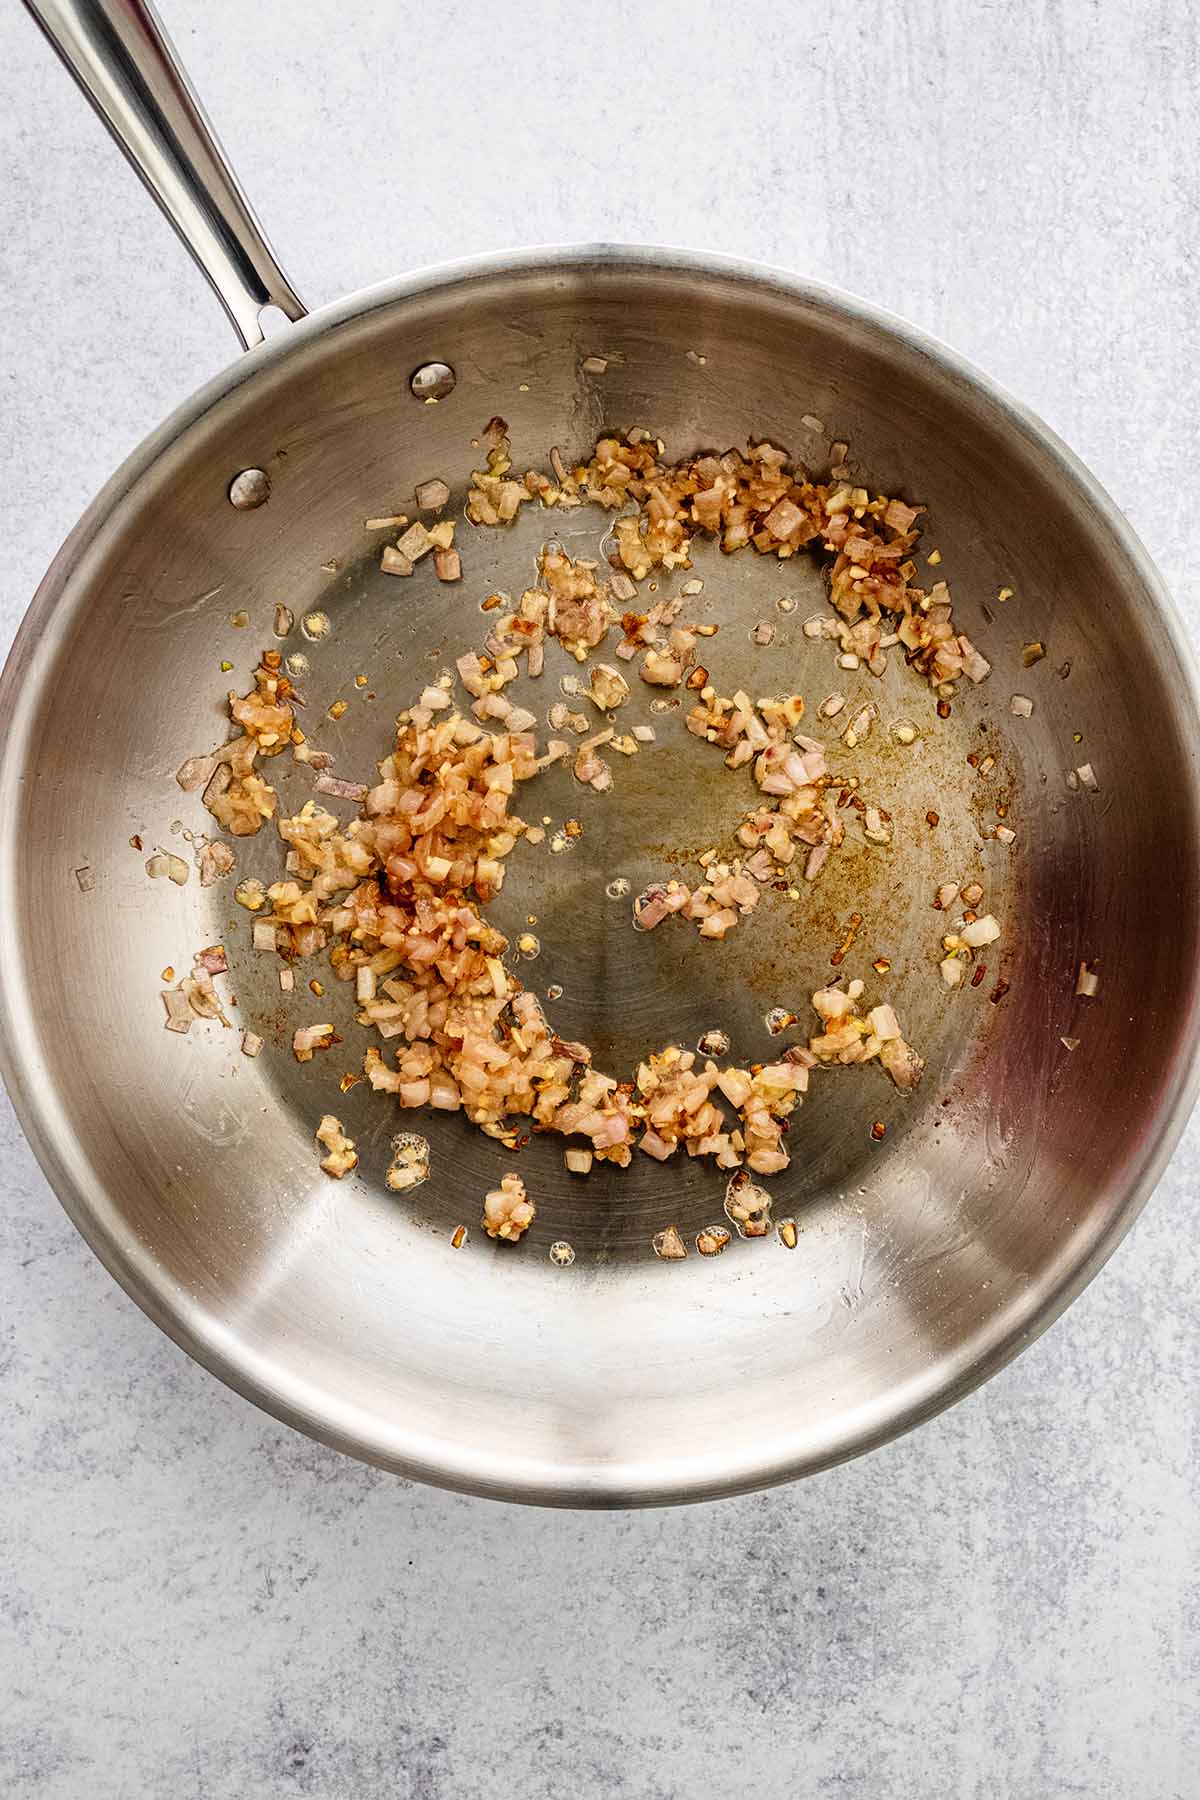 Minced garlic and cooked shallot in a skillet.